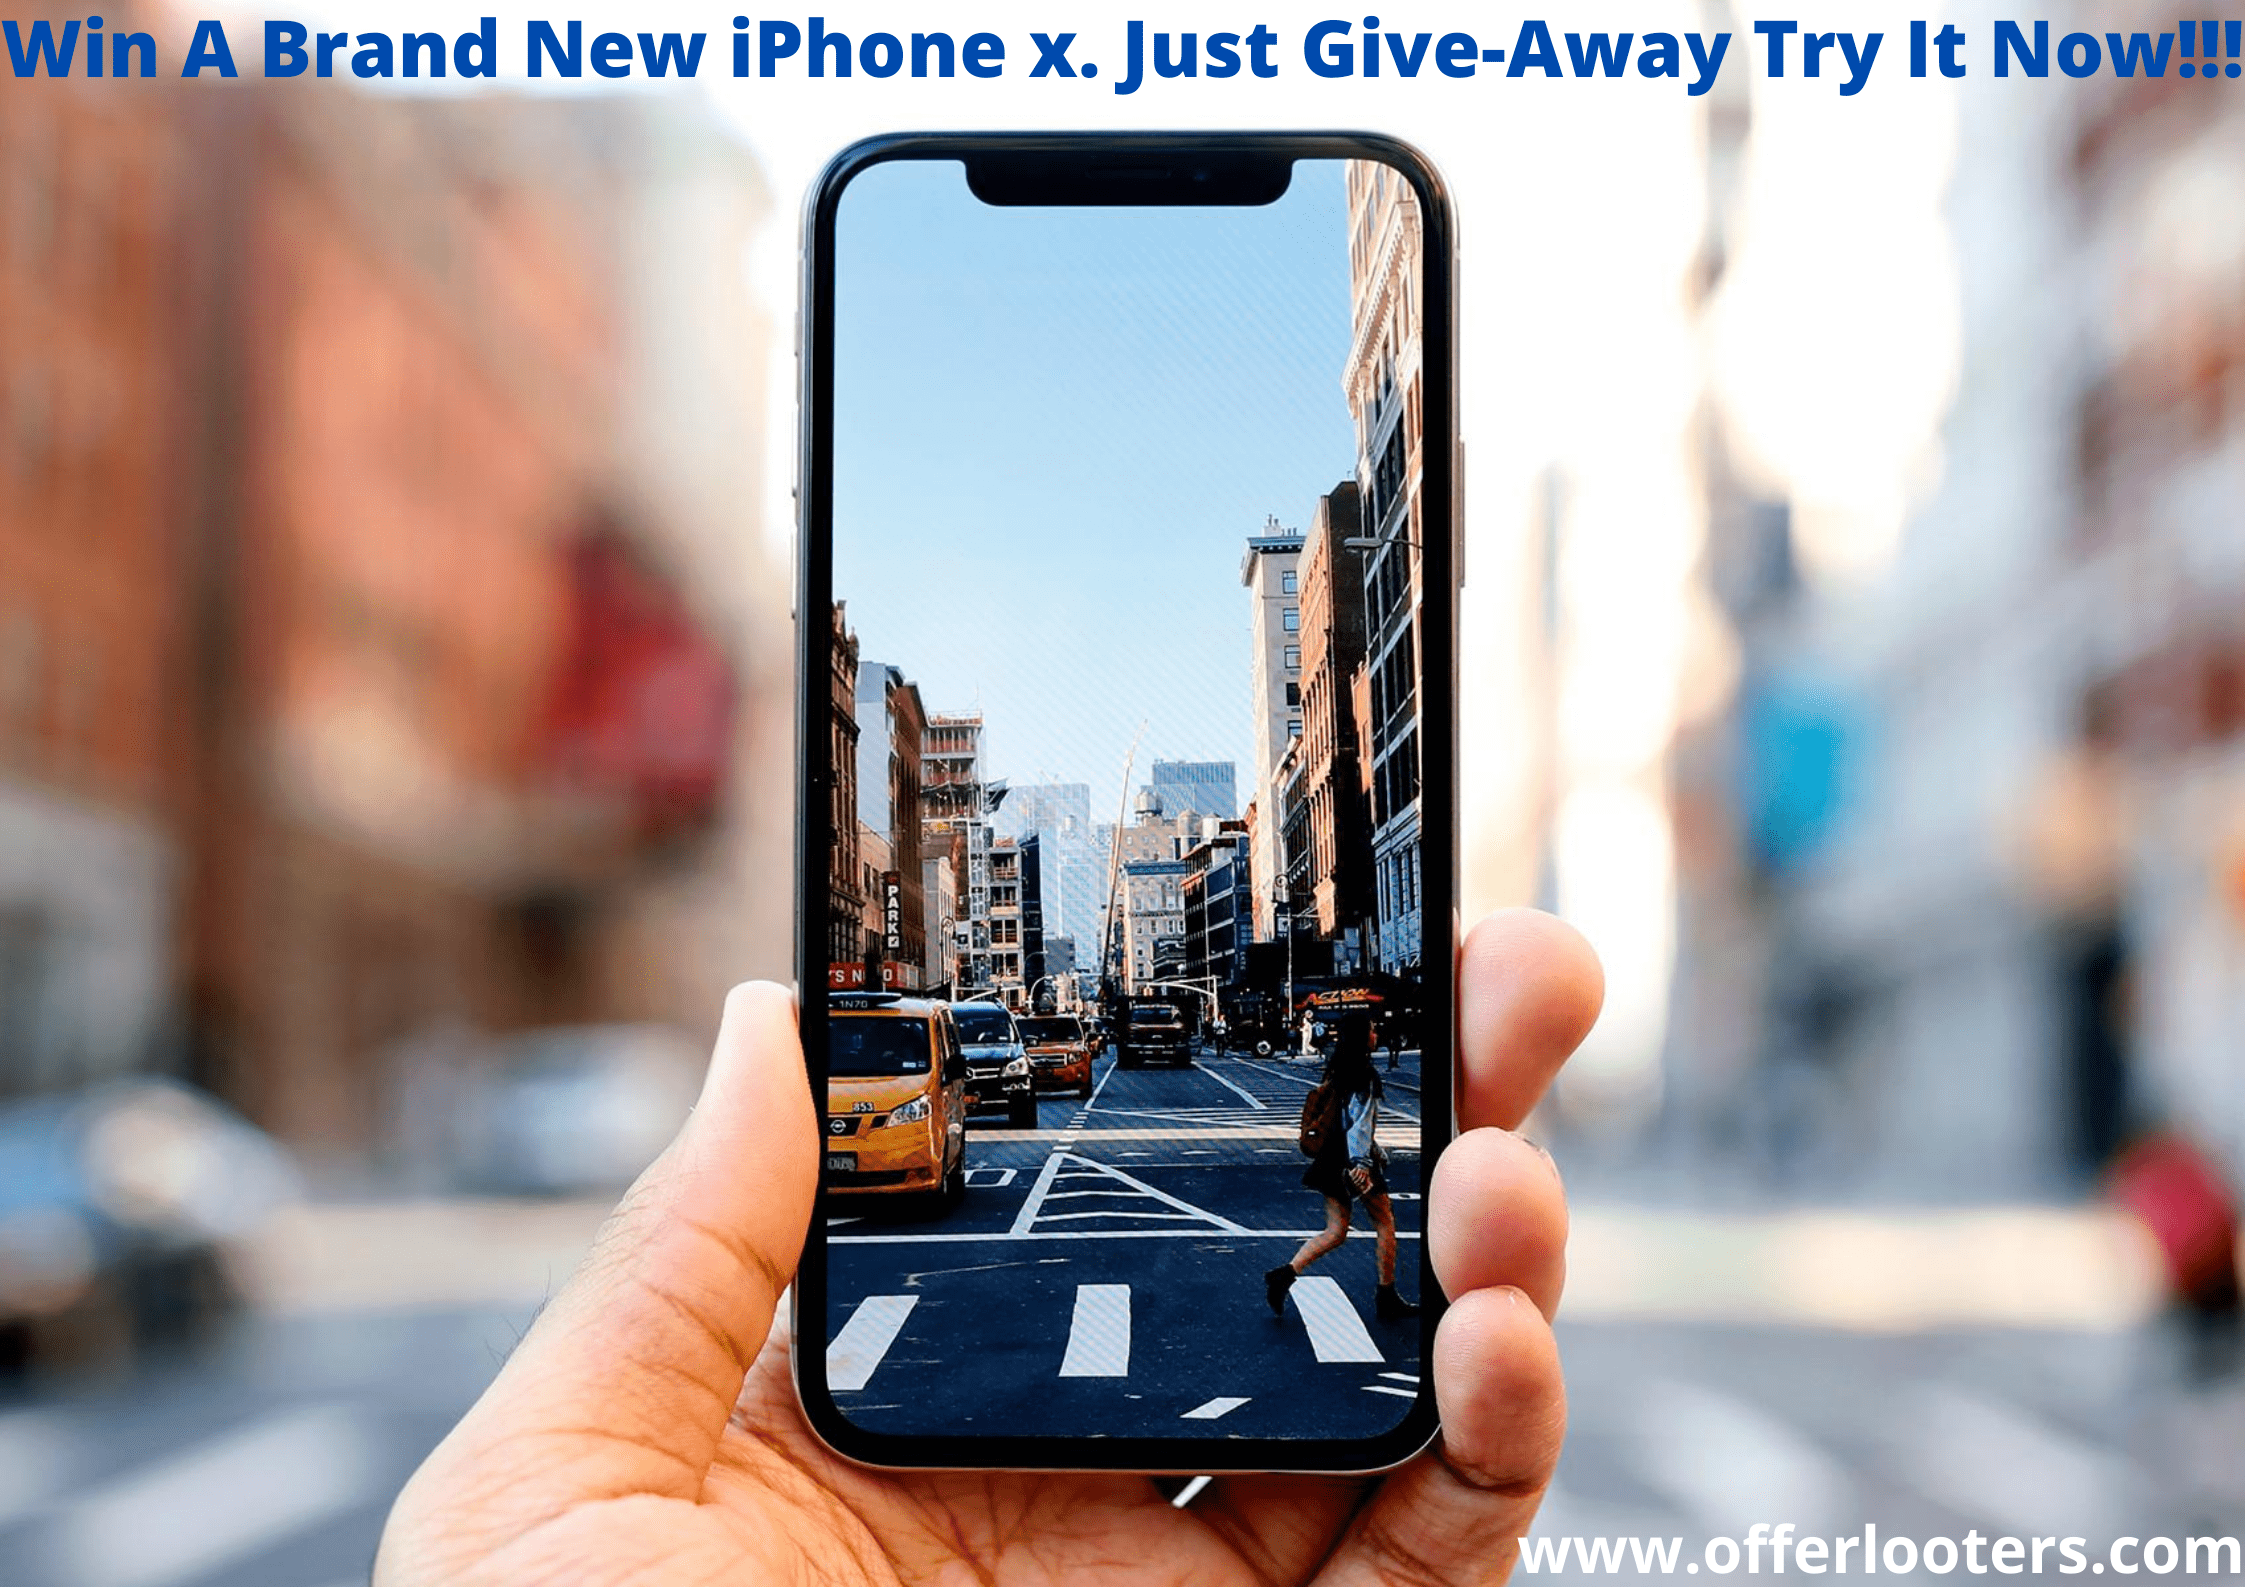 Win A Brand New iPhone X Give-Away. Just Try It Now !!